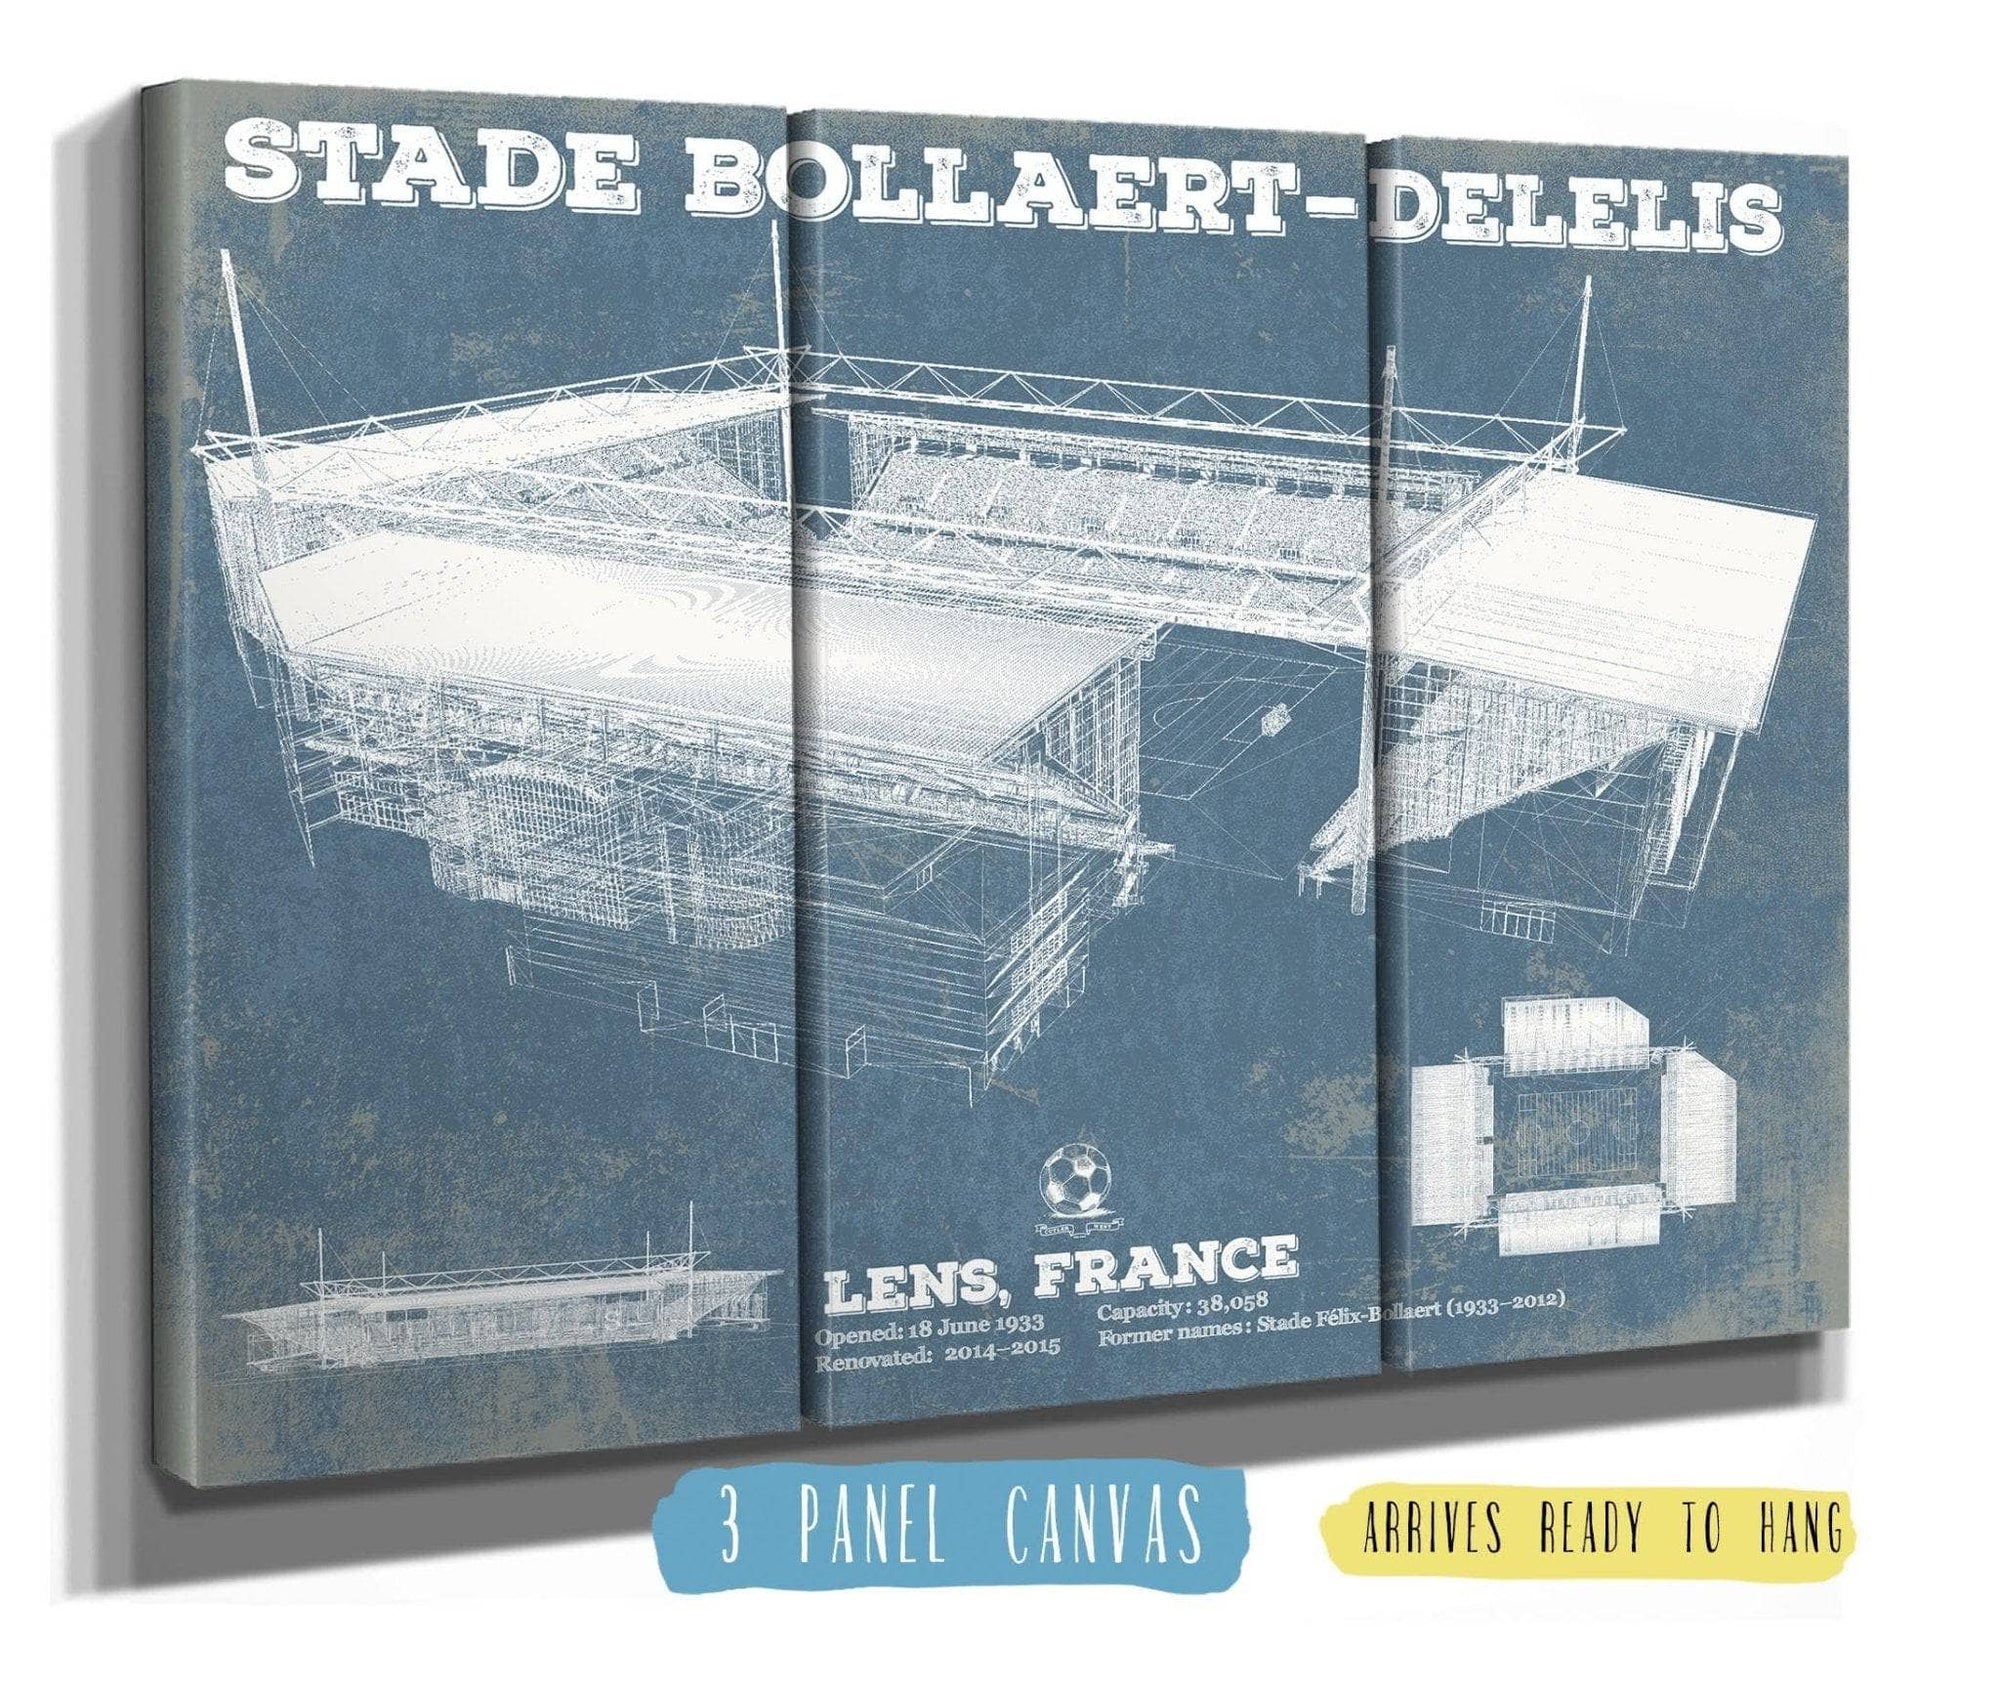 Cutler West Soccer Collection 48" x 32" / 3 Panel Canvas Wrap Vintage RC Lens Stade Bollaert-Delelis Stadium Soccer Print 799609456-48"-x-32"12646